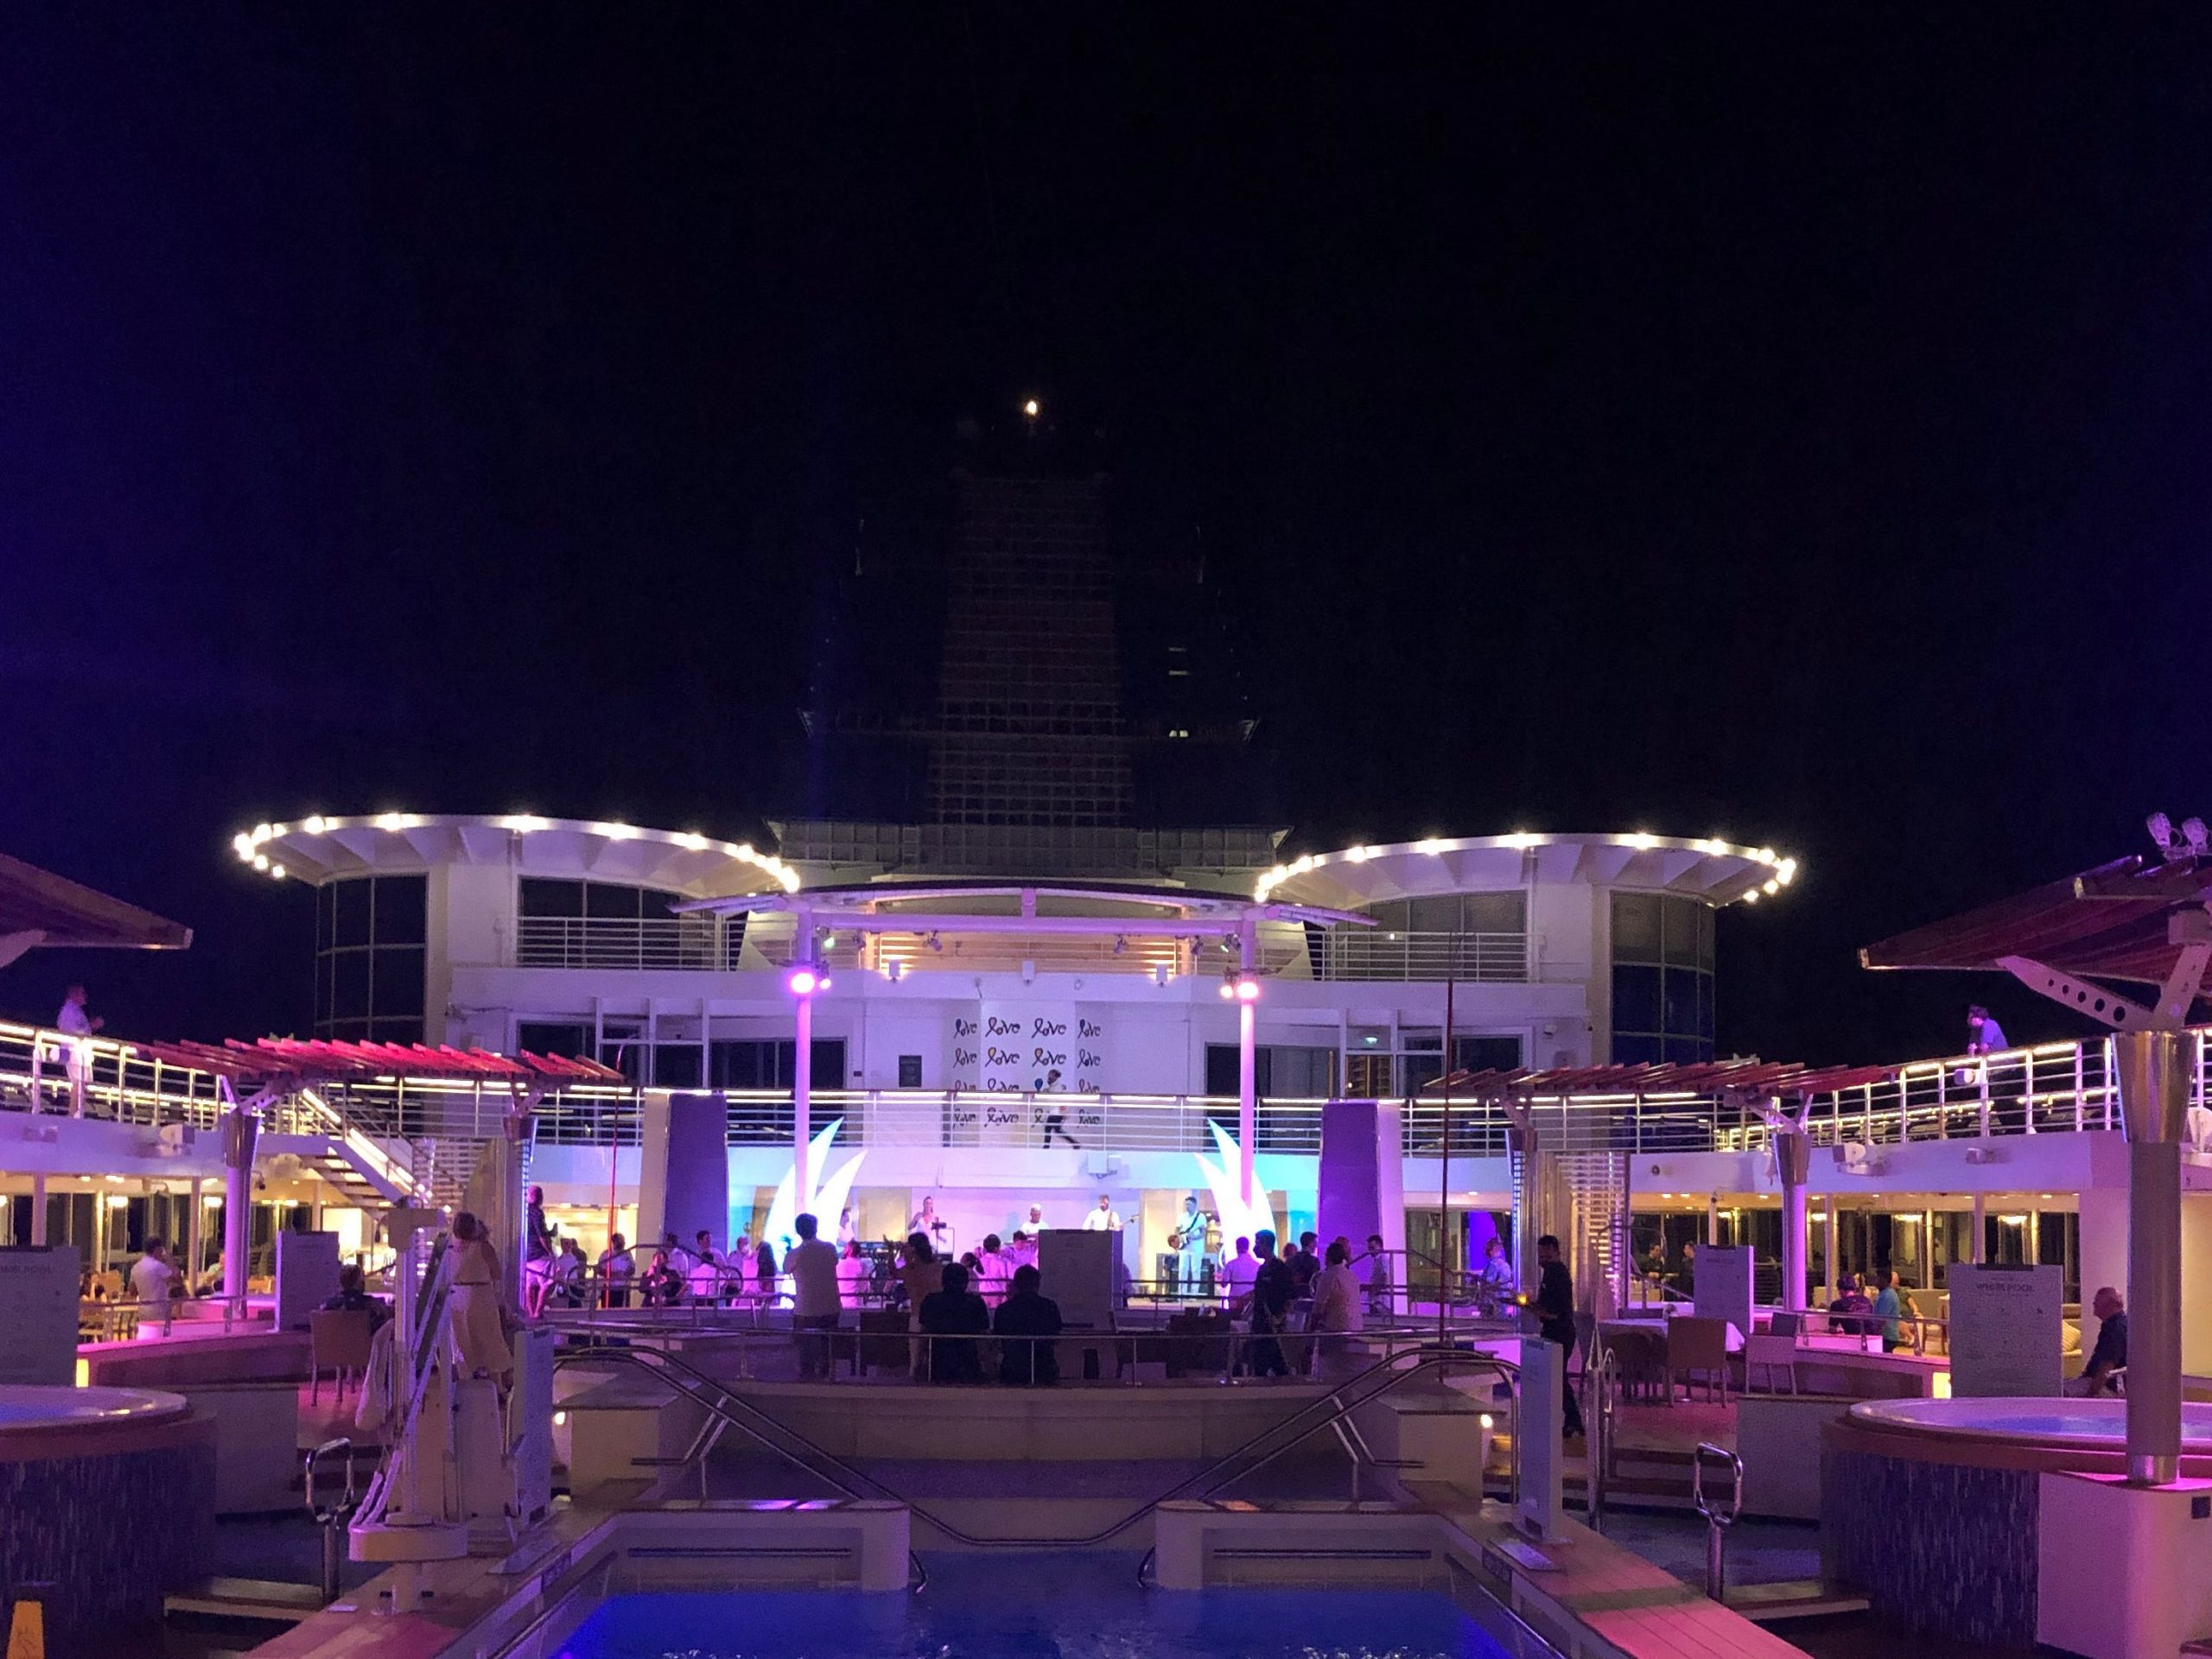 The cruise ship pool deck turned into a dance party one night, complete with neon lights, a live band, and line dances.